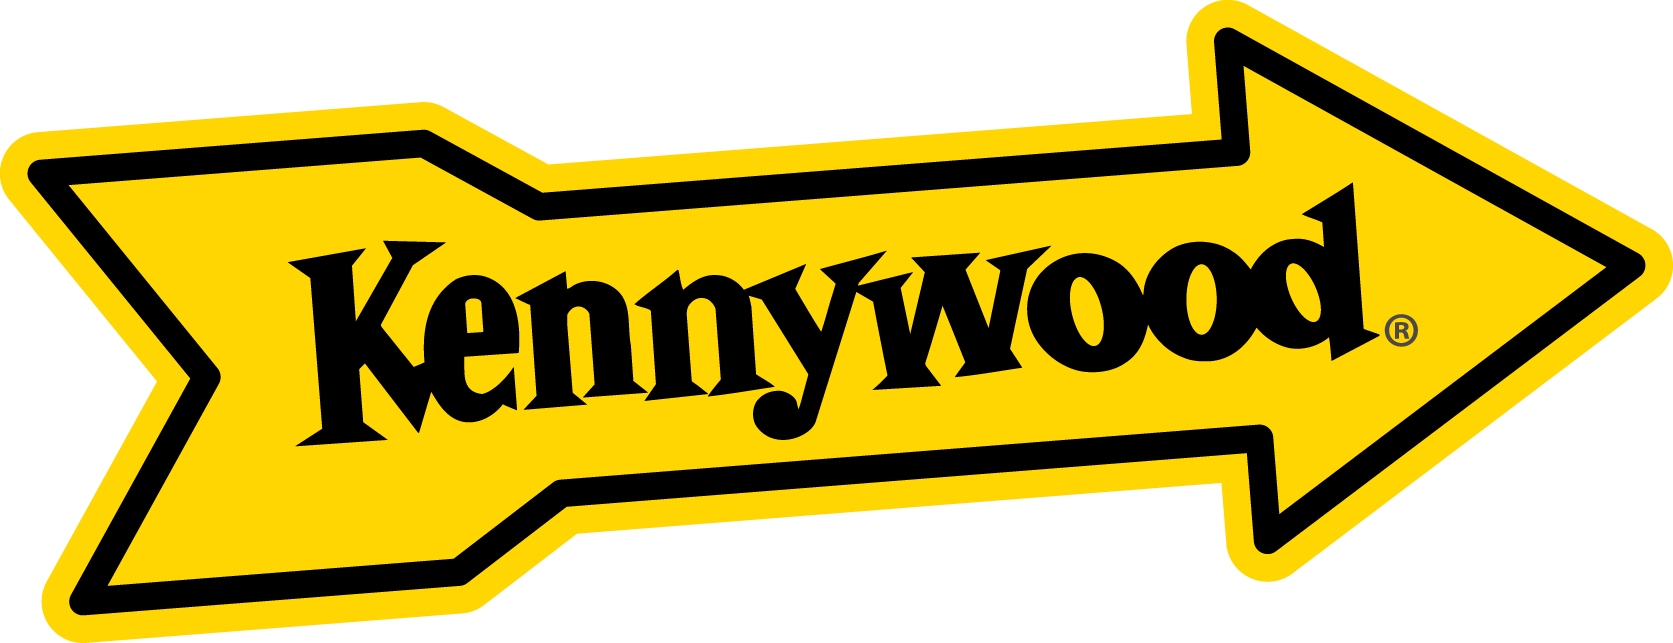 Kennywood Amusement Park, located near Pittsburgh, Pennsylvania, is one of the world's most historic amusement parks.